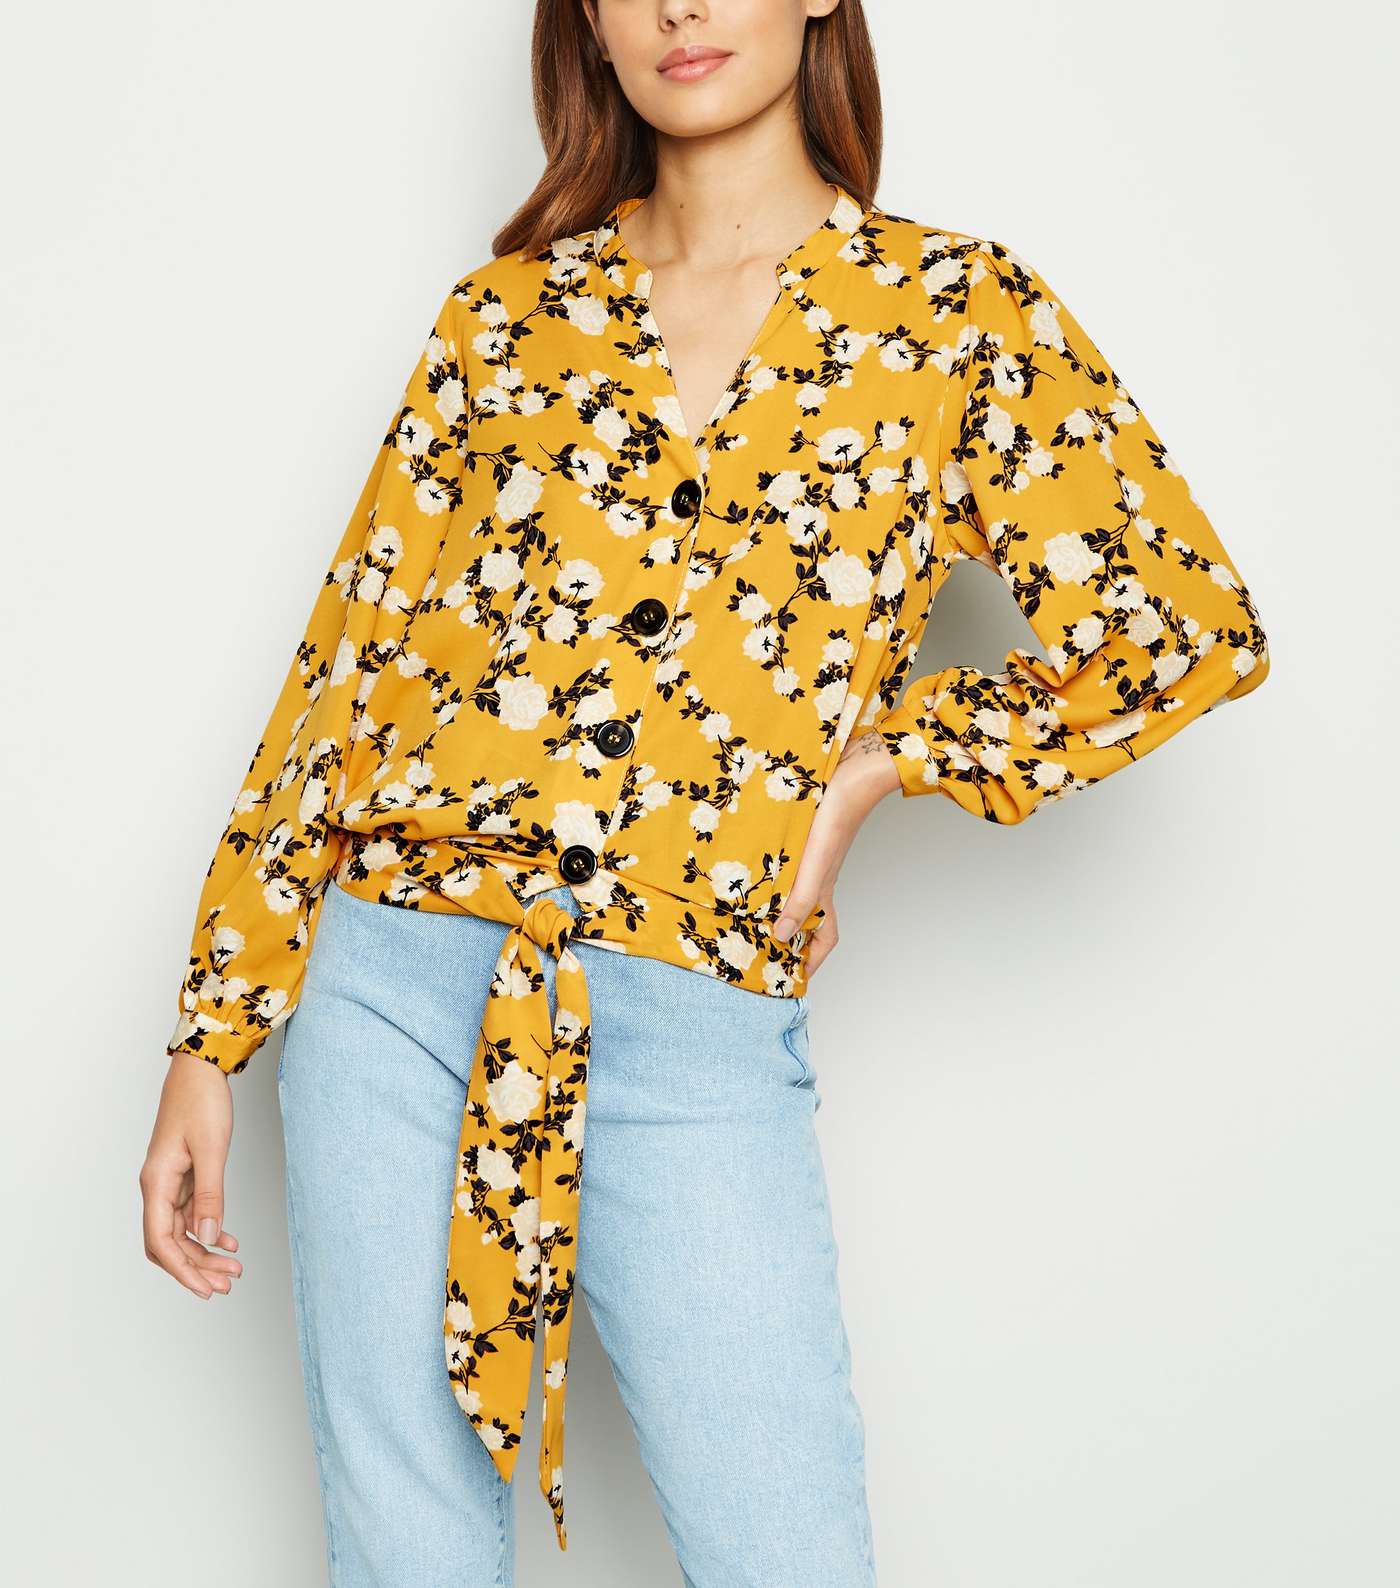 Blue Vanilla Yellow Floral Tie Front Blouse